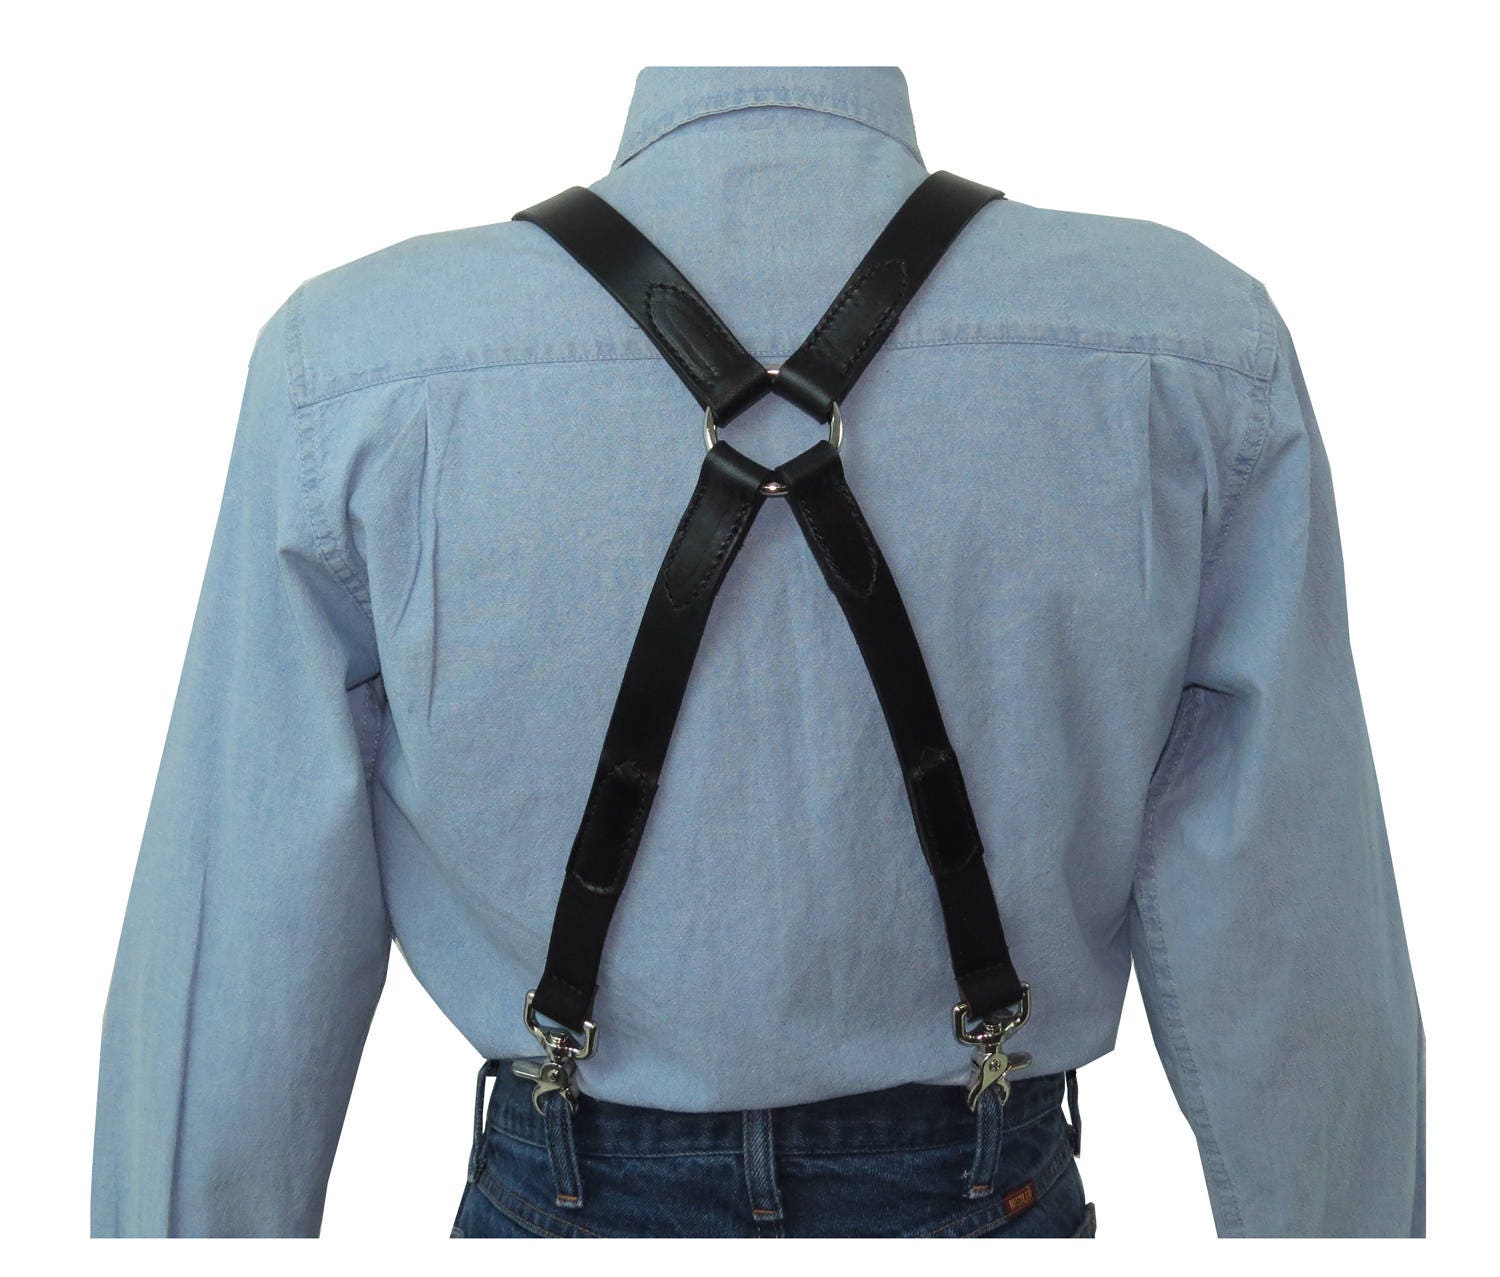 Big & Tall Black Premium Leather X-back Suspenders With Silver